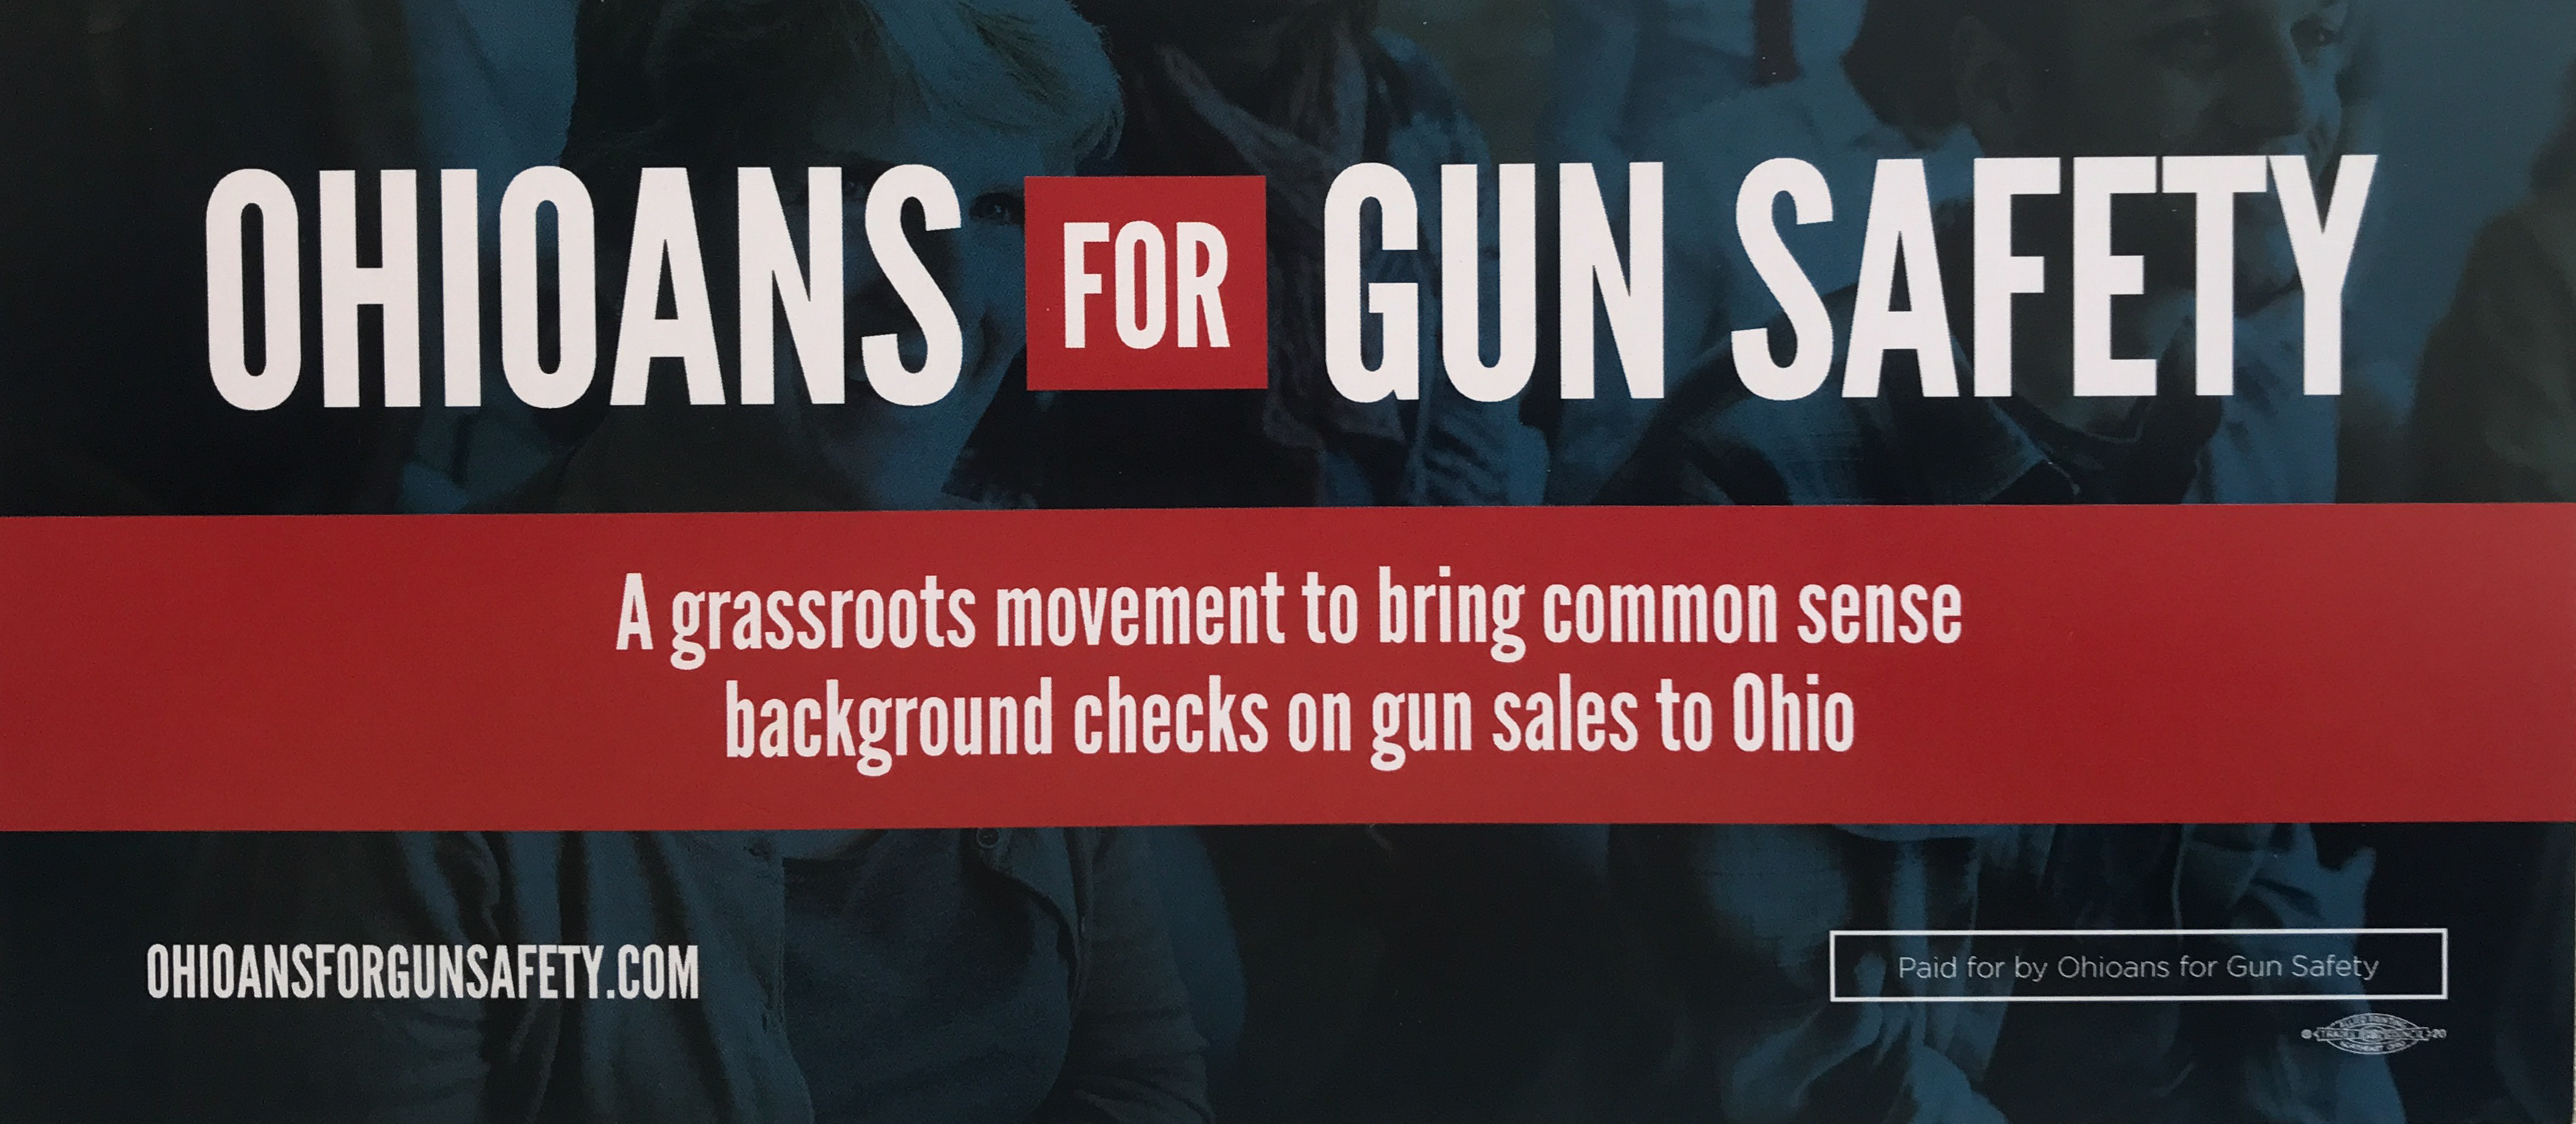 Ohioans for Gun Safety